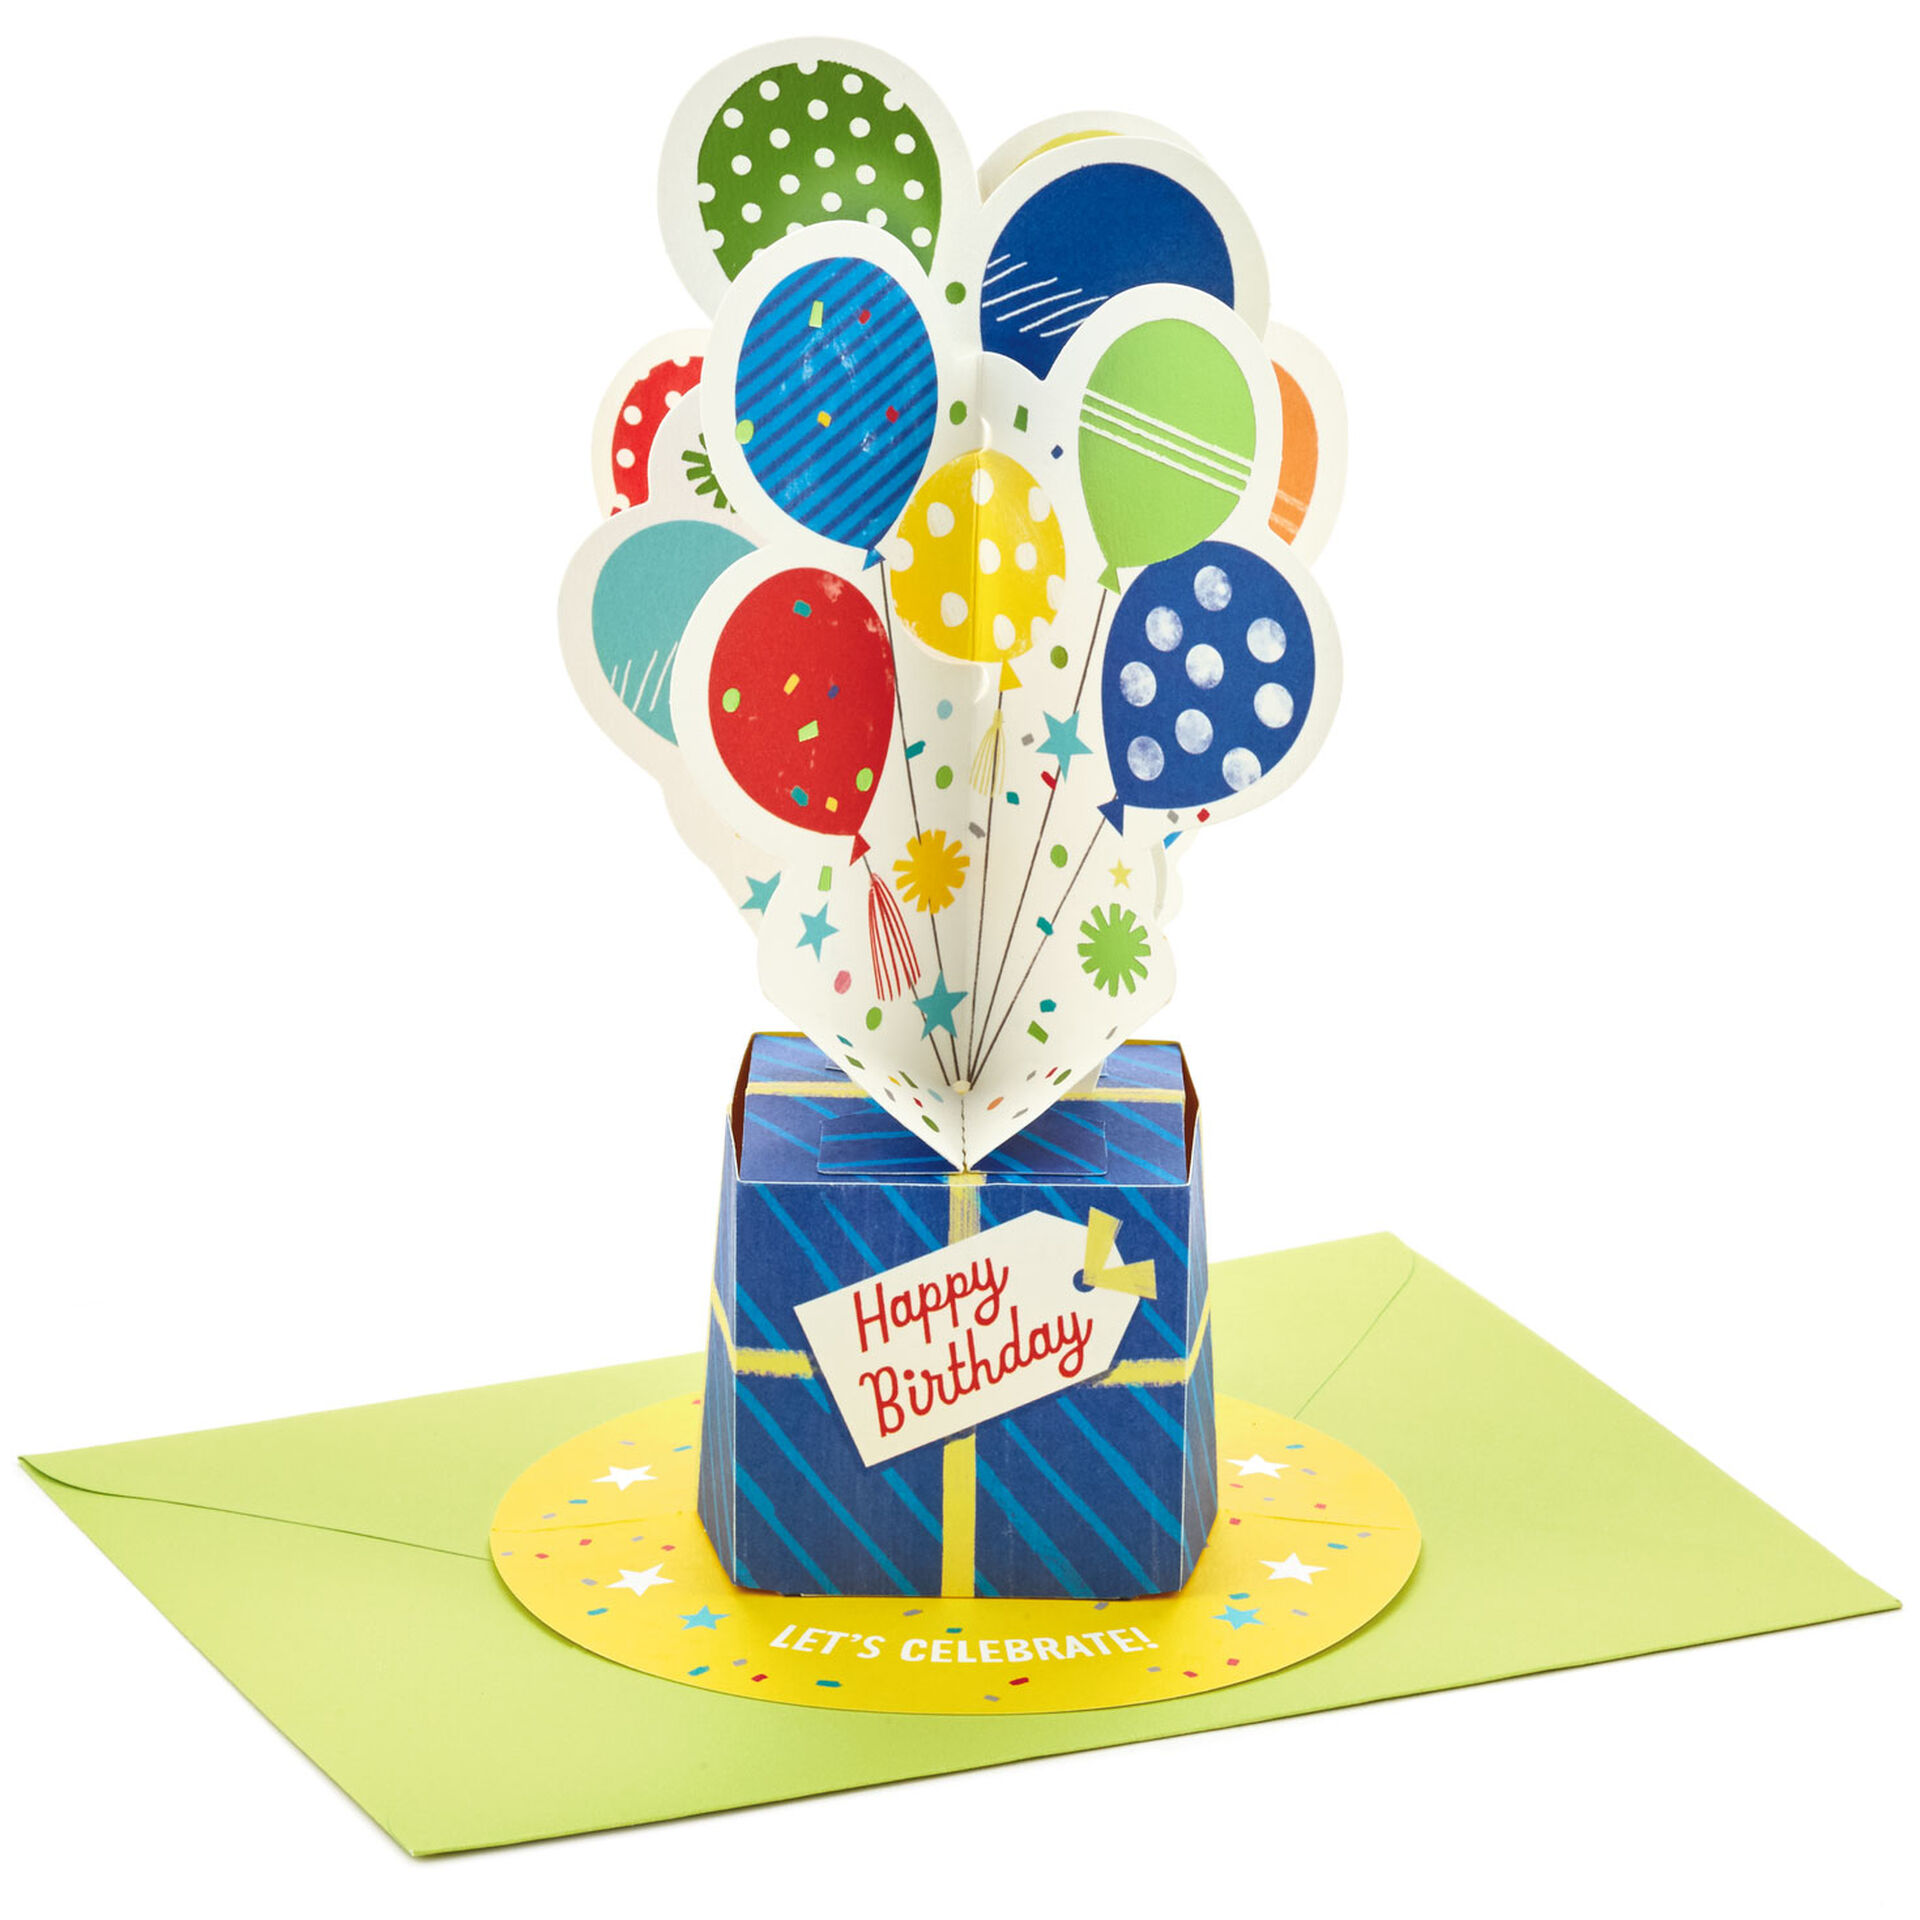 Balloons-and-Gift-3D-PopUp-Birthday-Card_599WDR1148_01